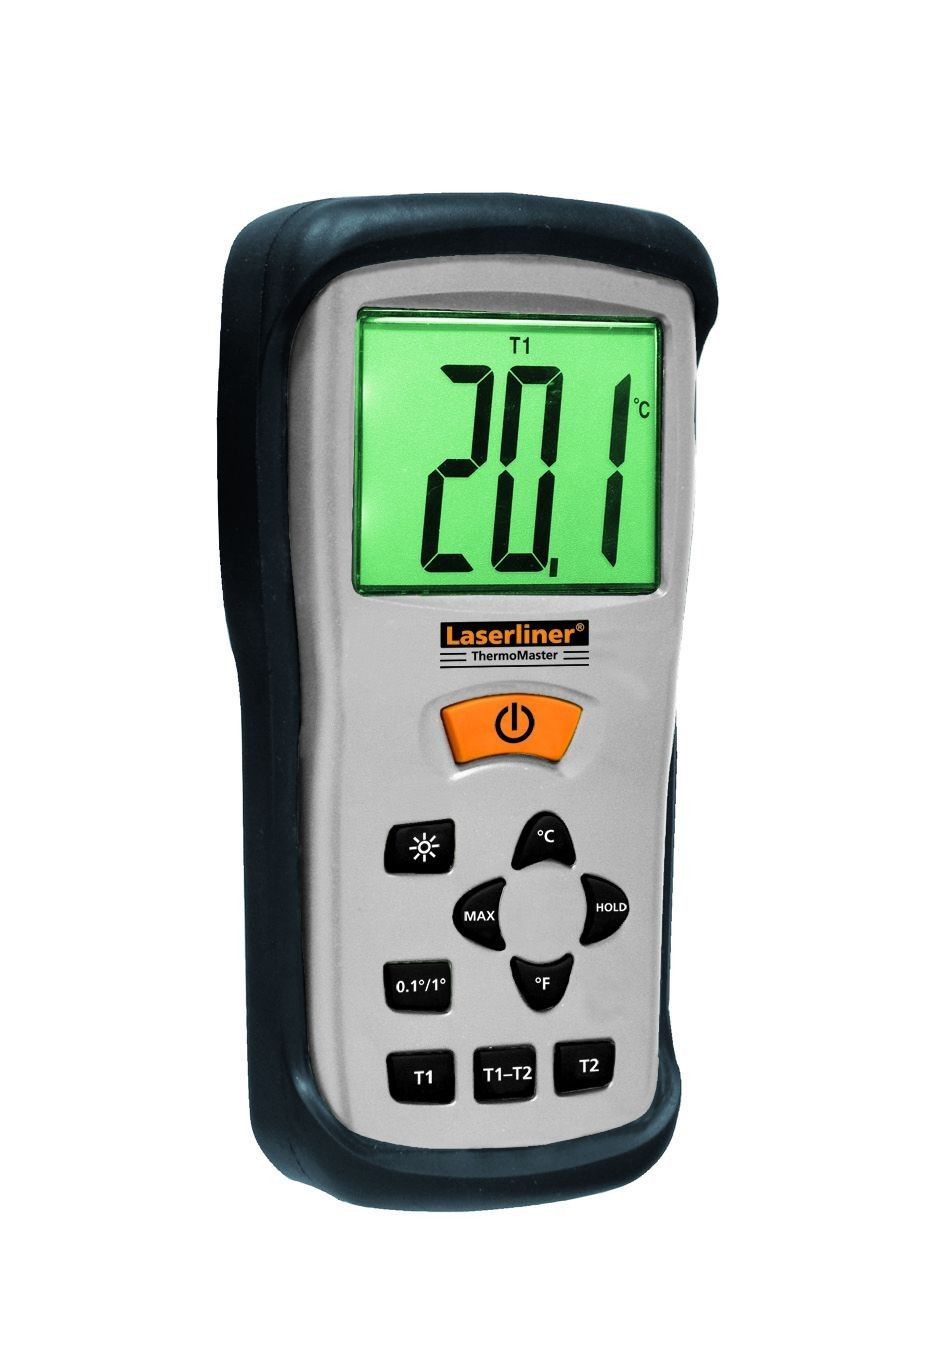 Laserliner ThermoMaster thermometer